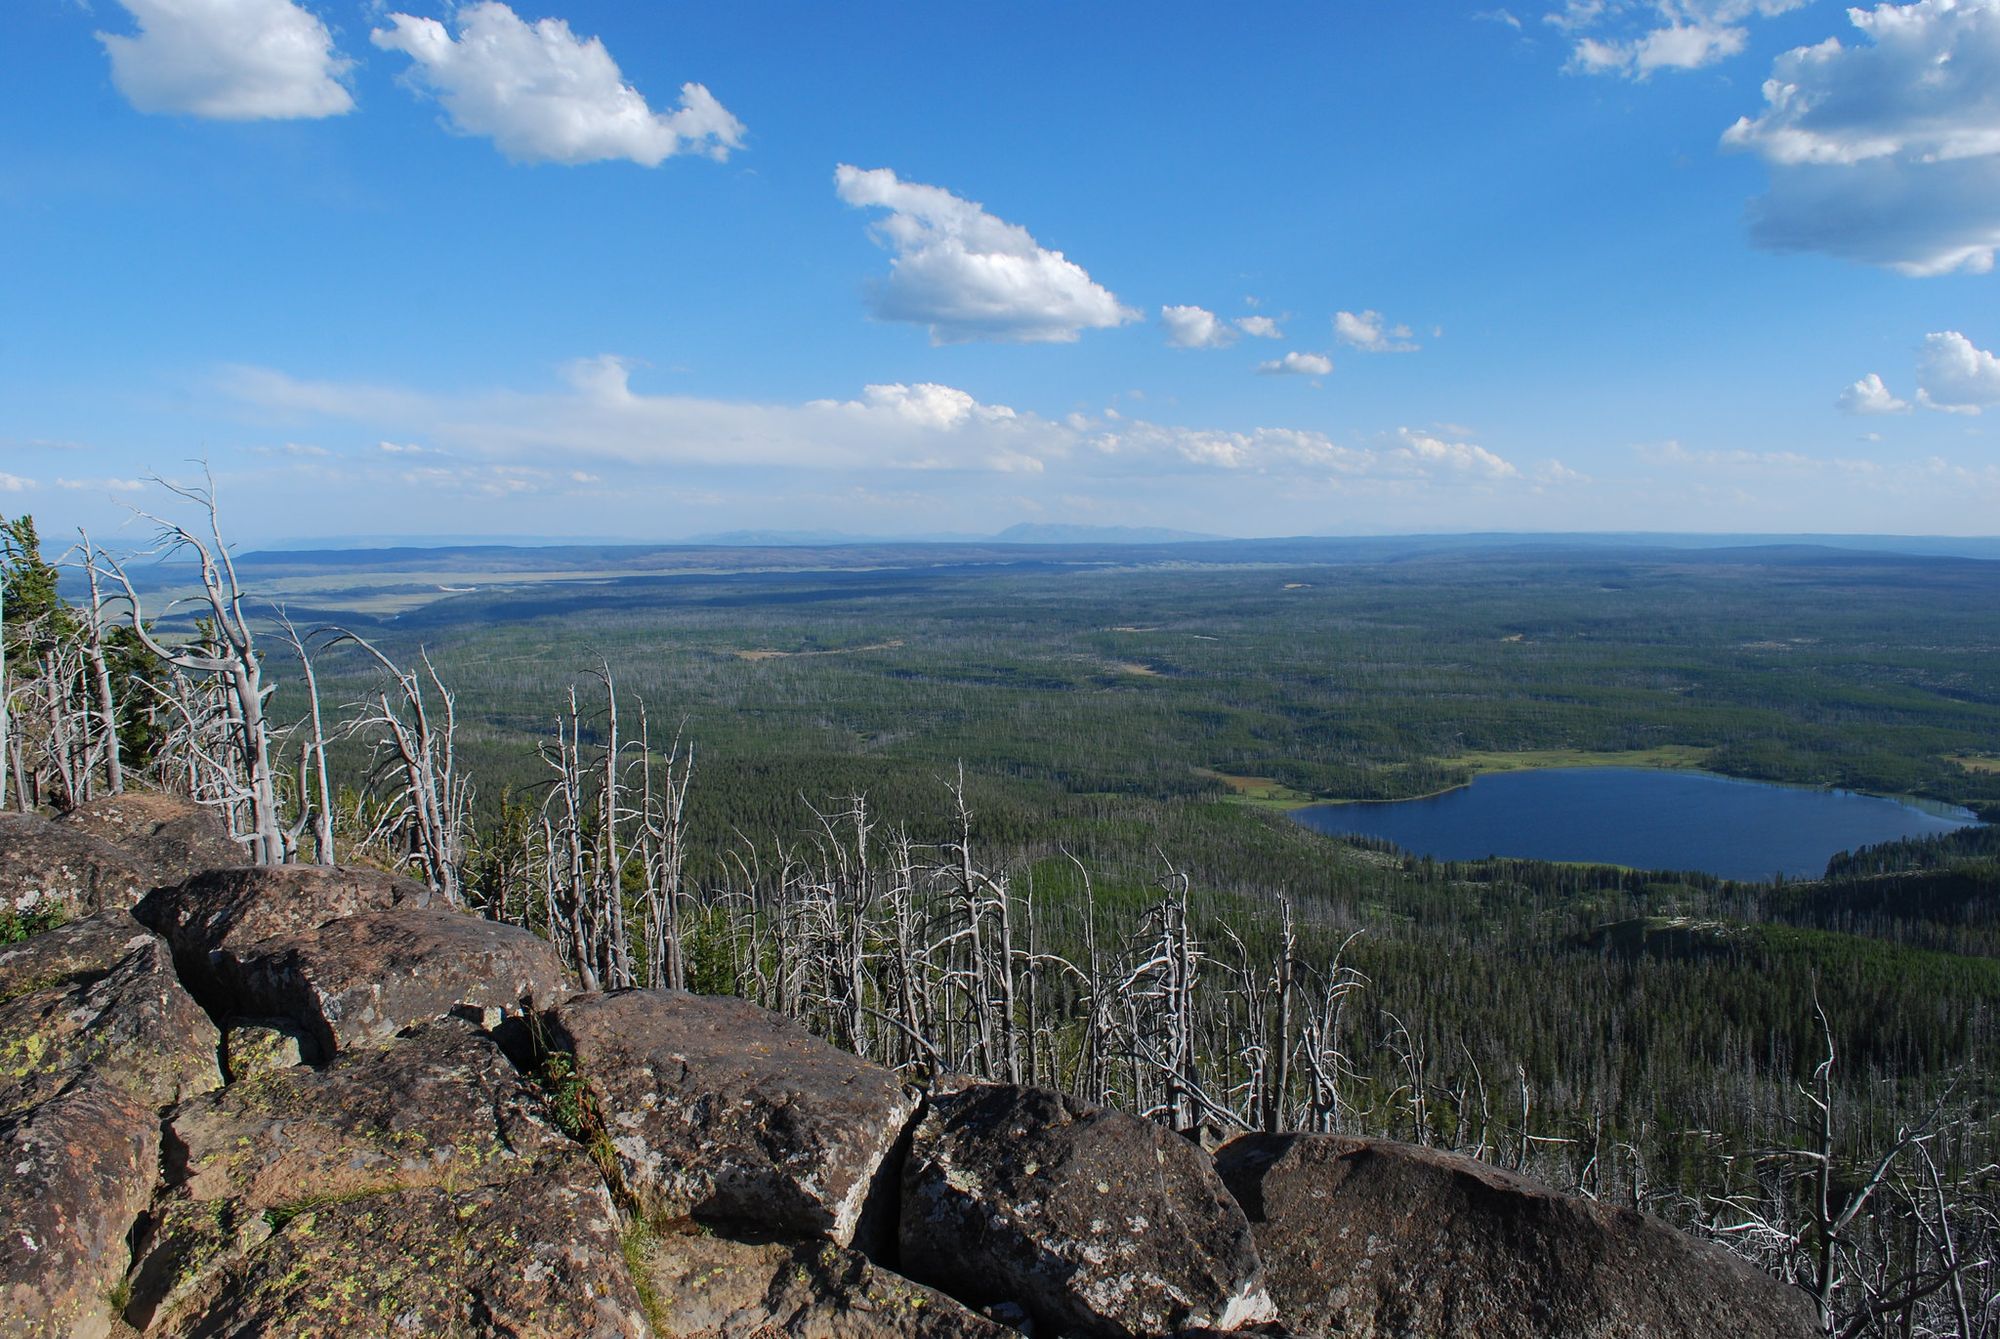 The view from Observation Peak in Yellowstone. Credit: John Marino (Flickr/CC by 2.0 license)